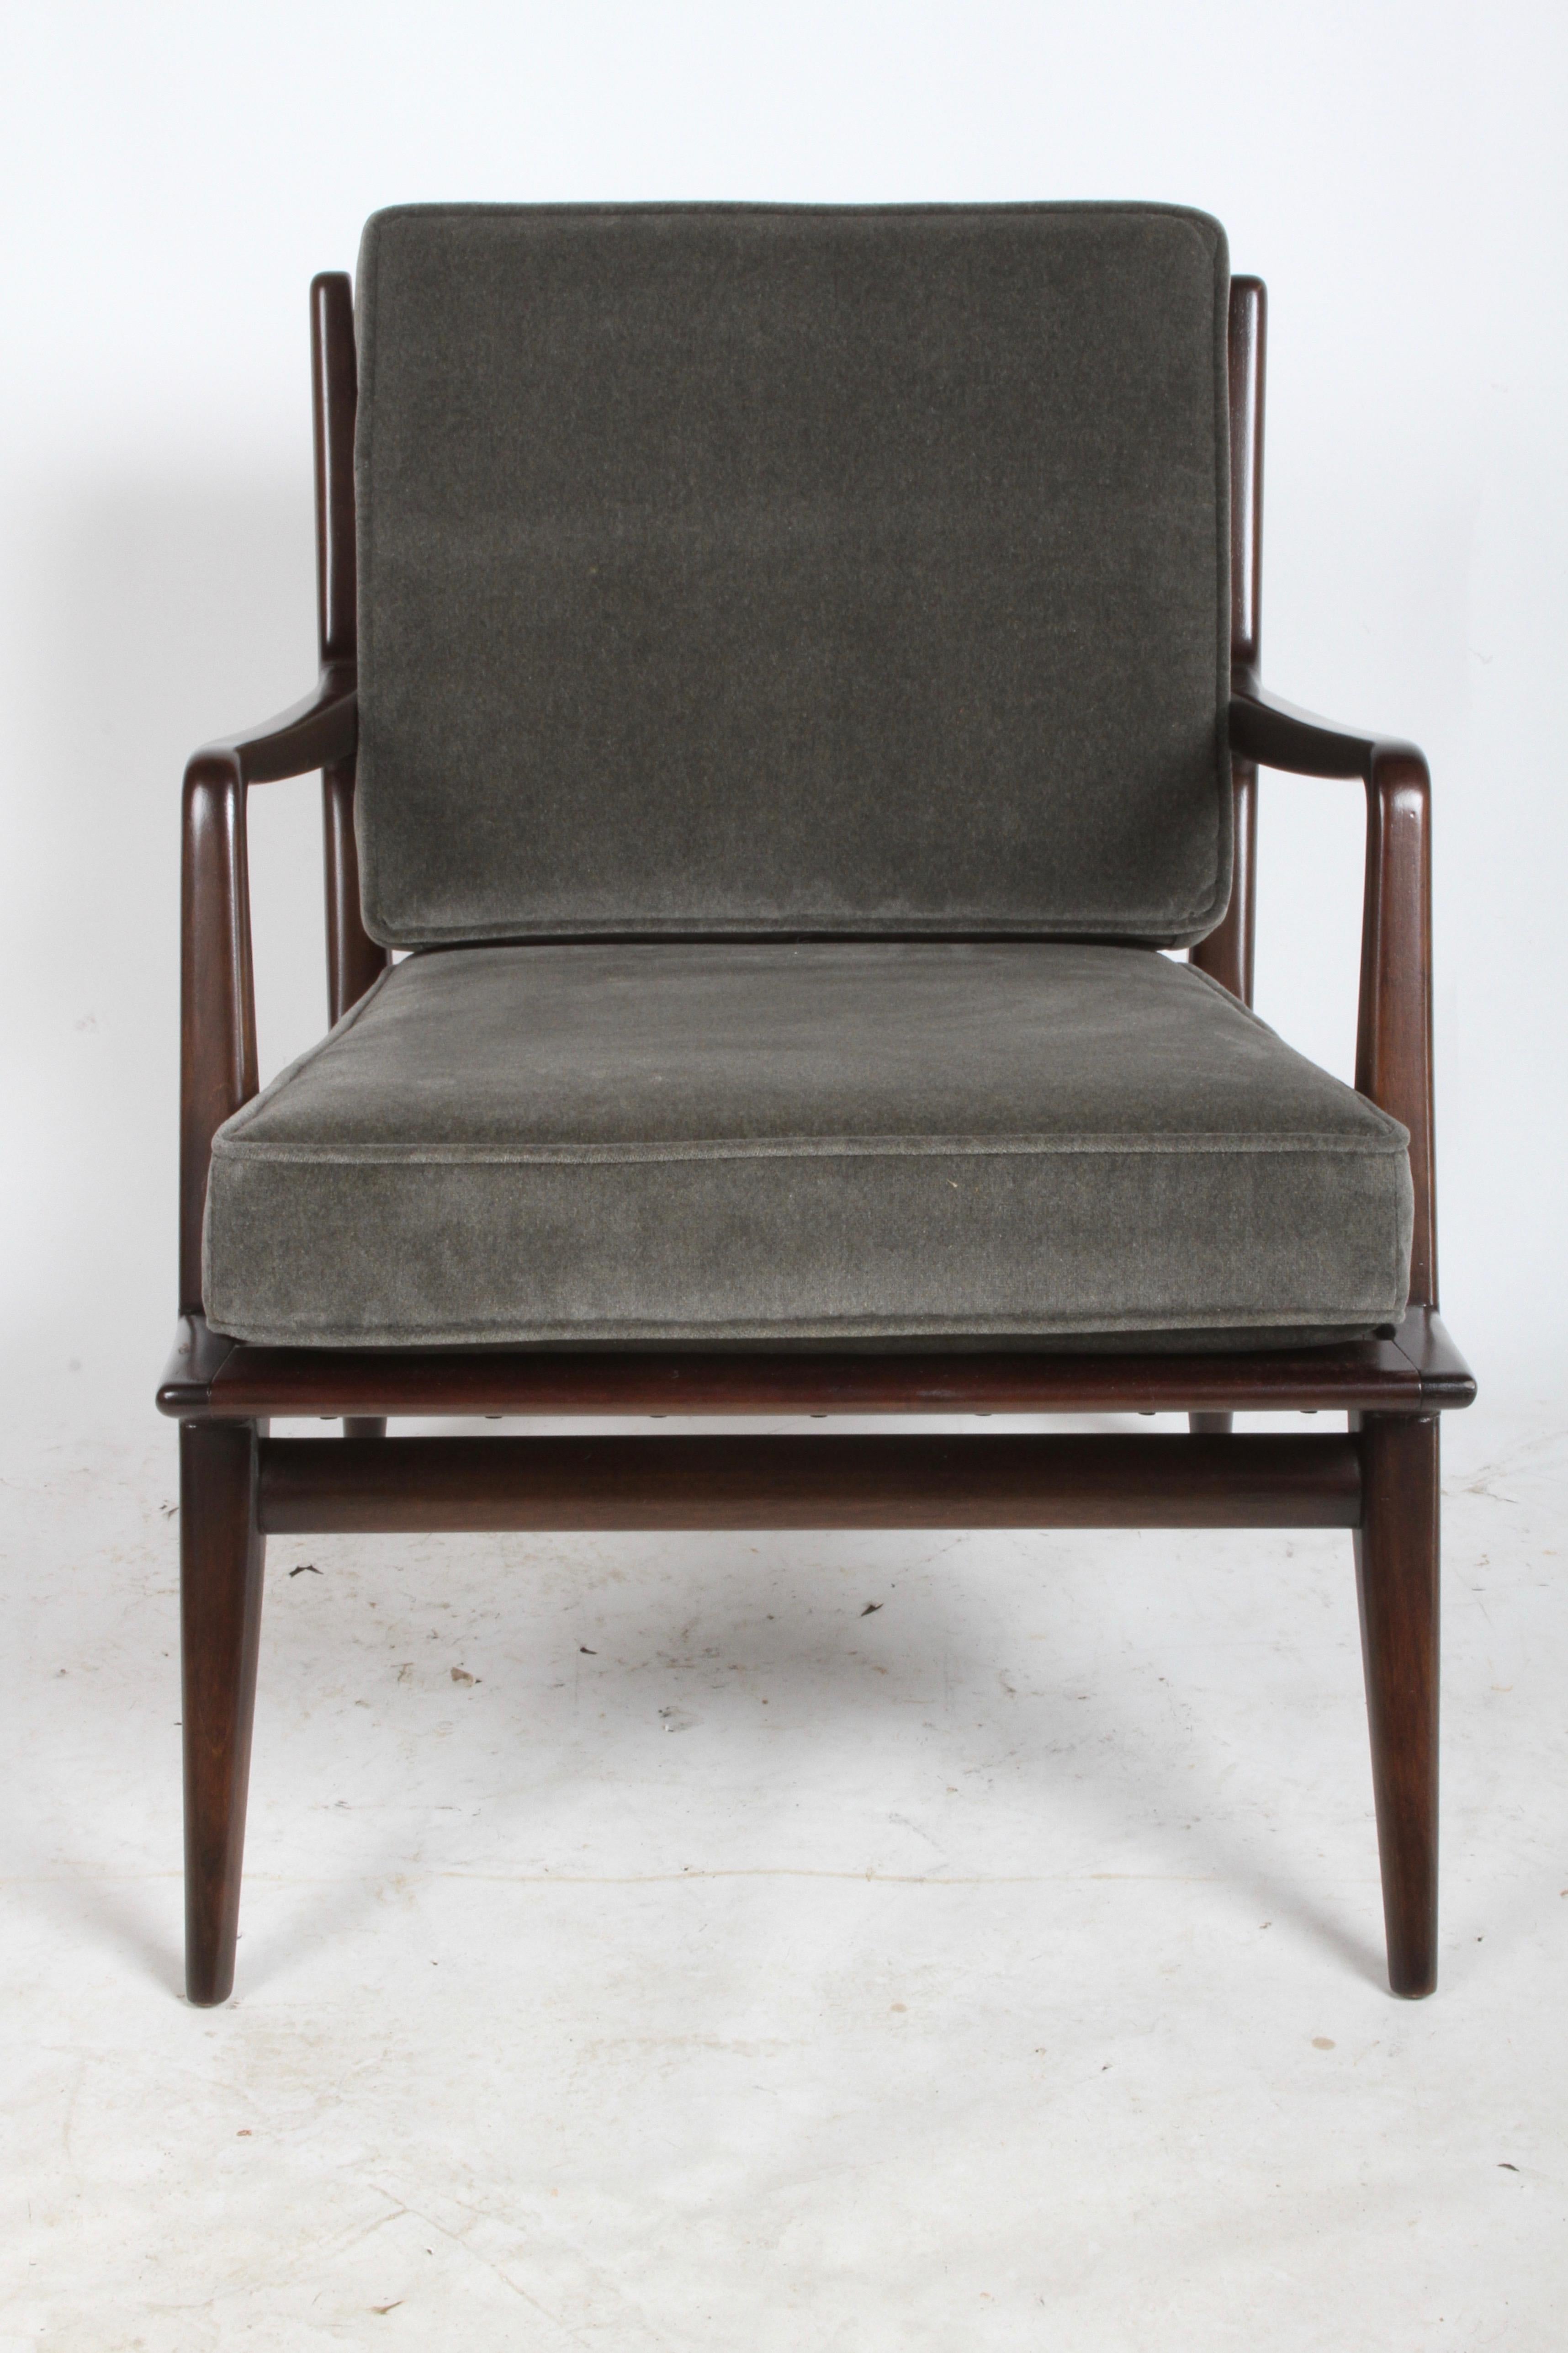 Carlo de Carli for M. Singer & Sons lounge chair circa 1950s completely restored with medium espresso finish. Upholstered in gray mohair with new foam. Classic Mid-Century Modern Italian design.